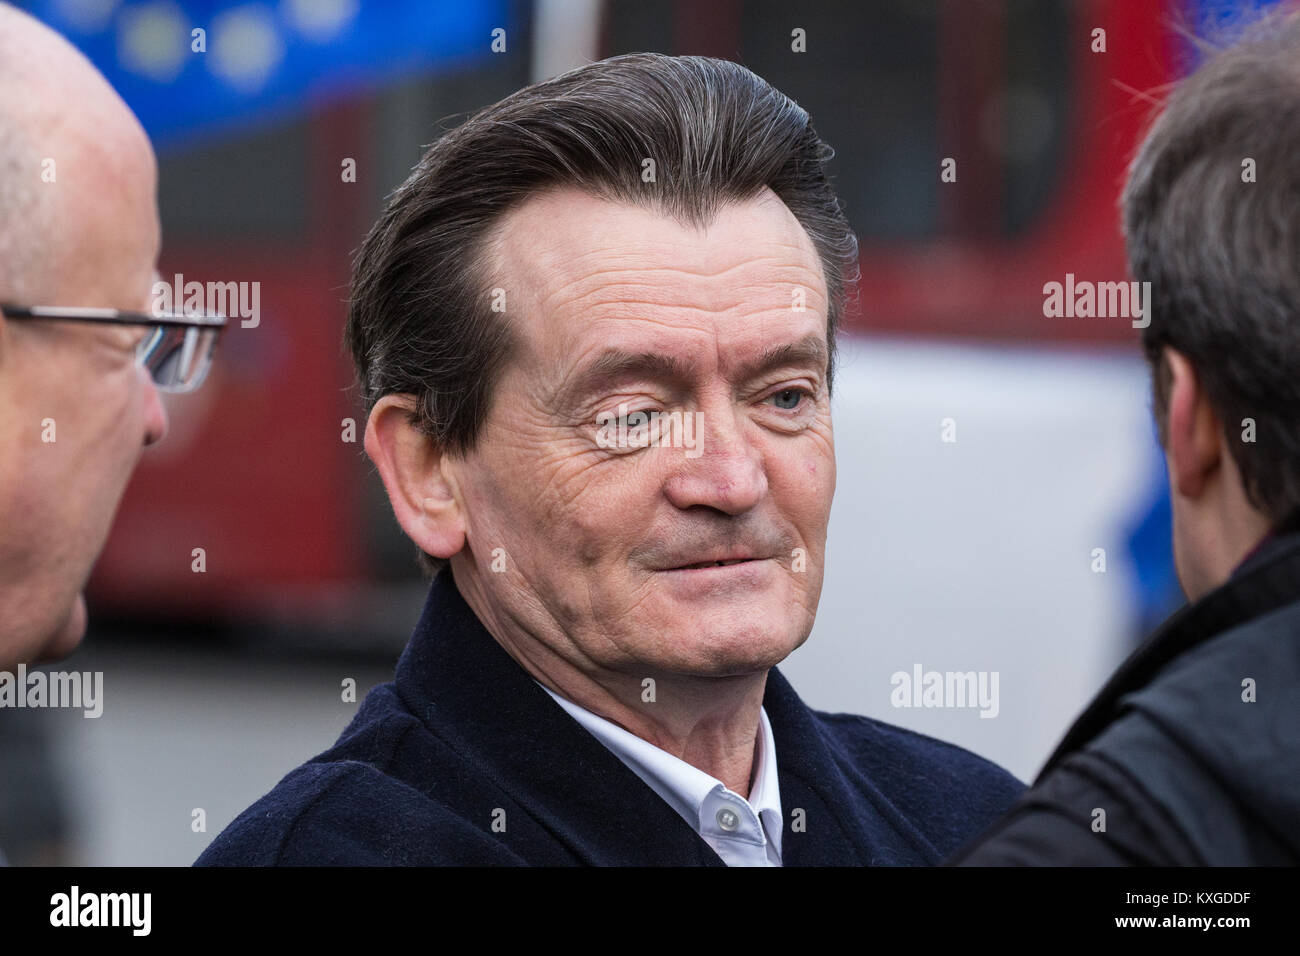 London, UK. 10th Jan, 2018. Feargal Sharkey, best known as lead singer of seminal Irish punk/new wave band The Undertones, lends his support to a campaigners calling for the Government to back the Agent Of Change policy being tabled in a Bill in Parliament today by Labour MP John Spellar to prevent the closure of grassroots music venues. Many musicians, such as Paul McCartney and Pink Floyd, have backed the campaign. Credit: Mark Kerrison/Alamy Live News Stock Photo